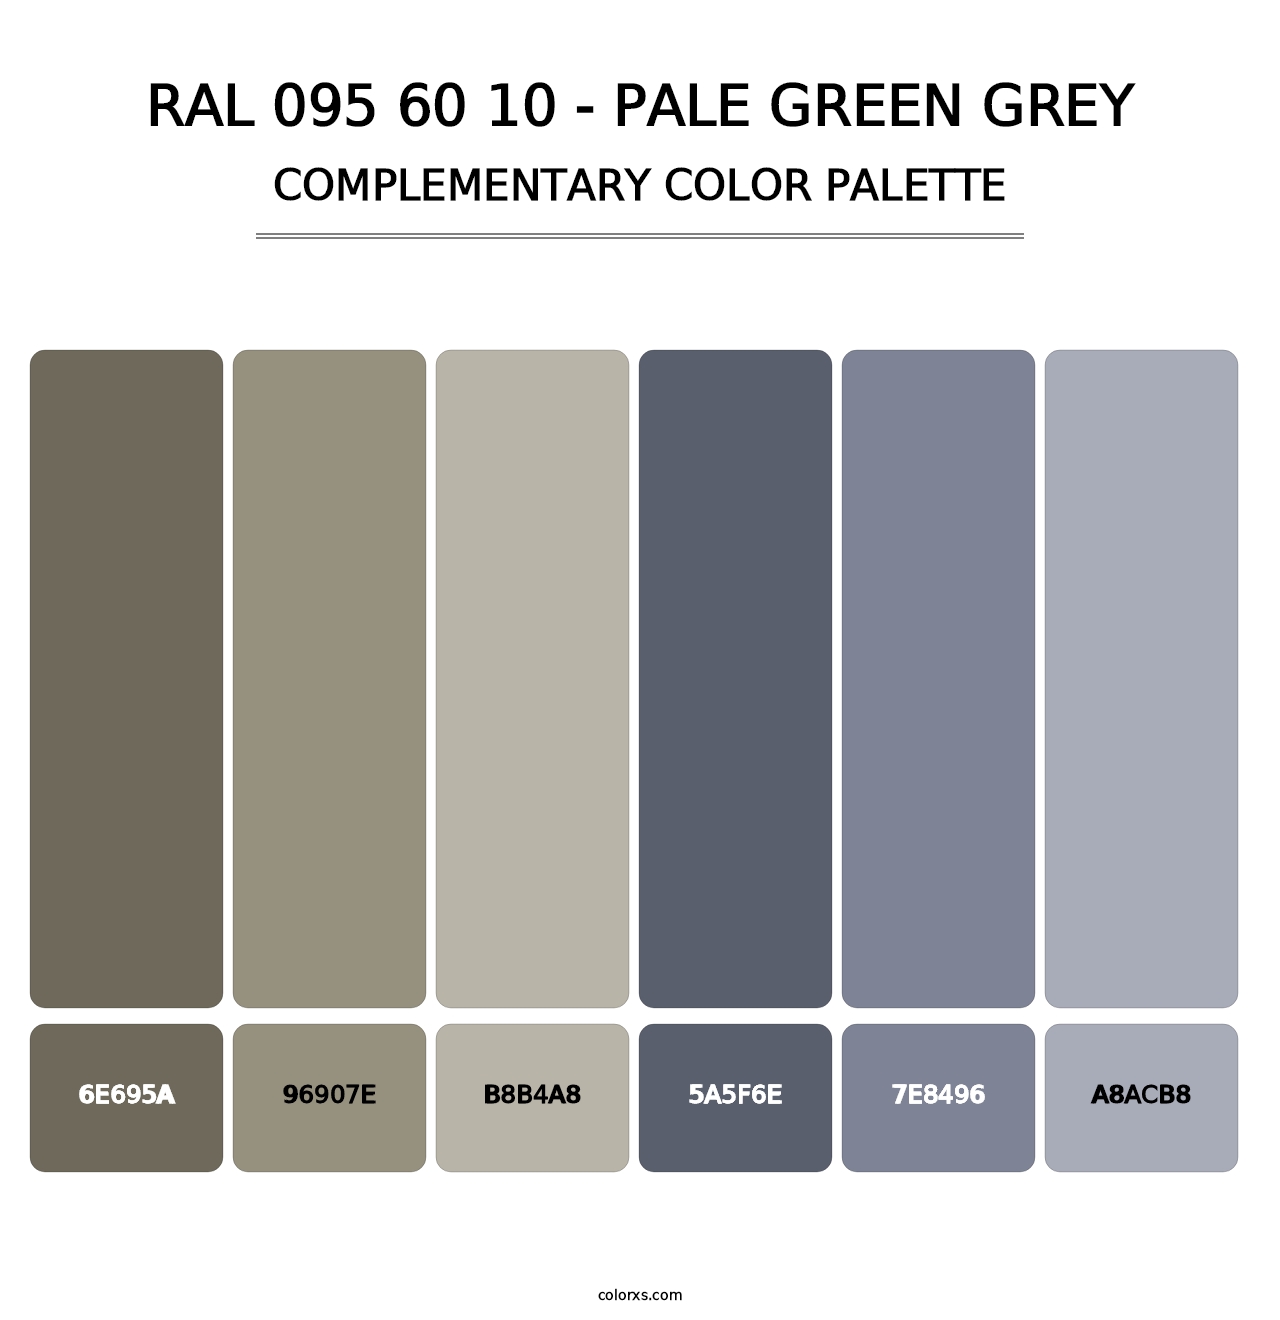 RAL 095 60 10 - Pale Green Grey - Complementary Color Palette